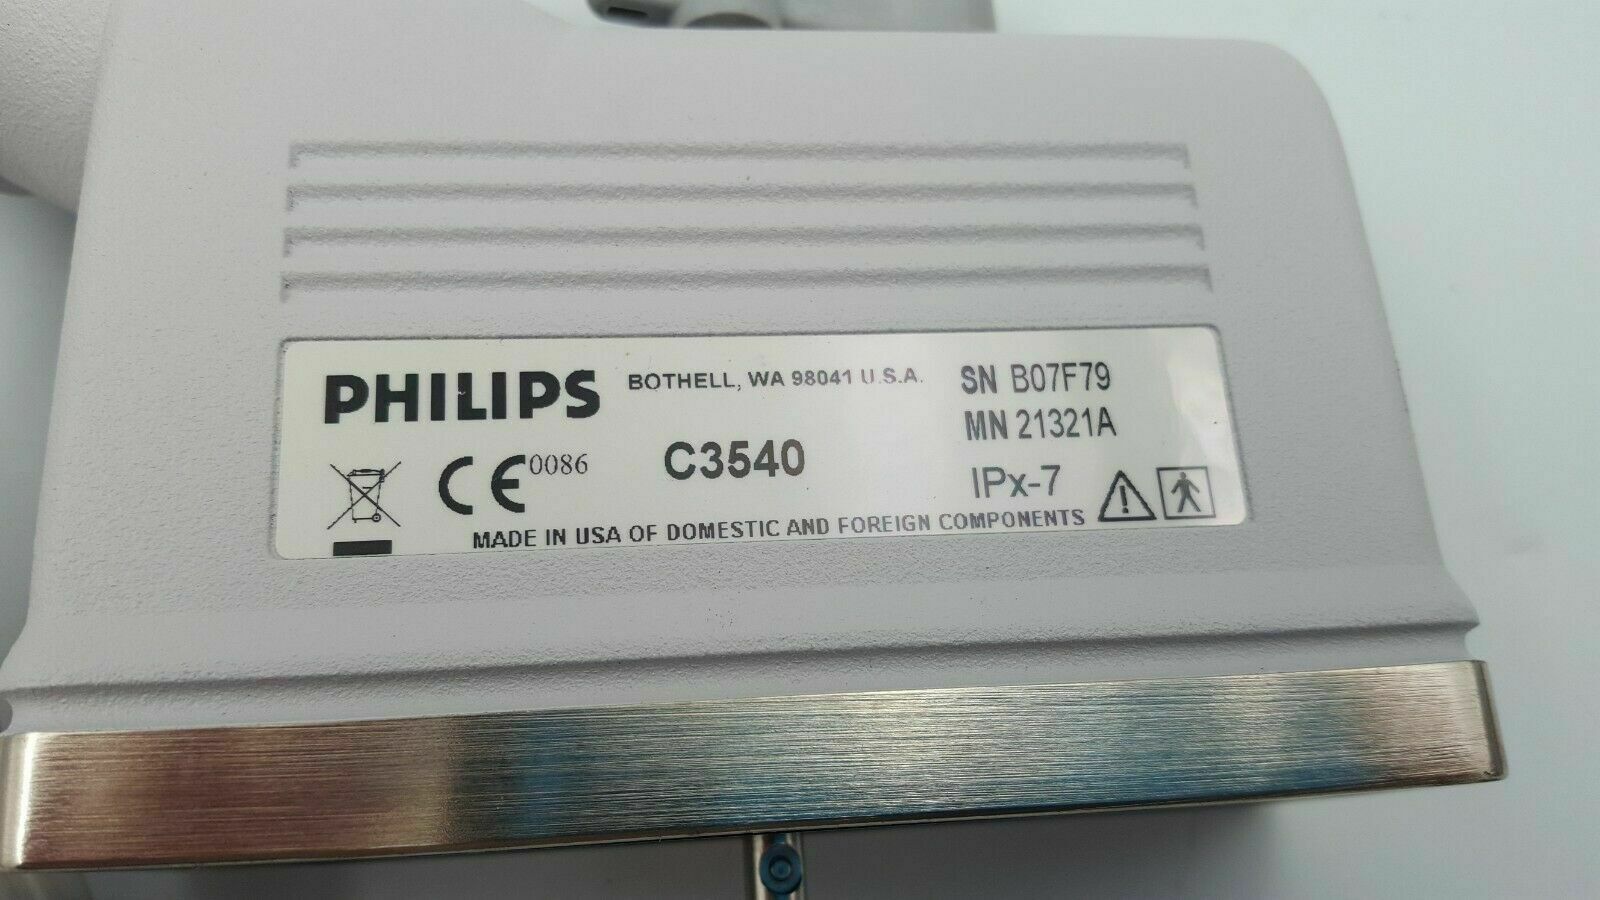 Philips 21321A / C3540 Curved Array Ultrasound Transducer Probe DIAGNOSTIC ULTRASOUND MACHINES FOR SALE